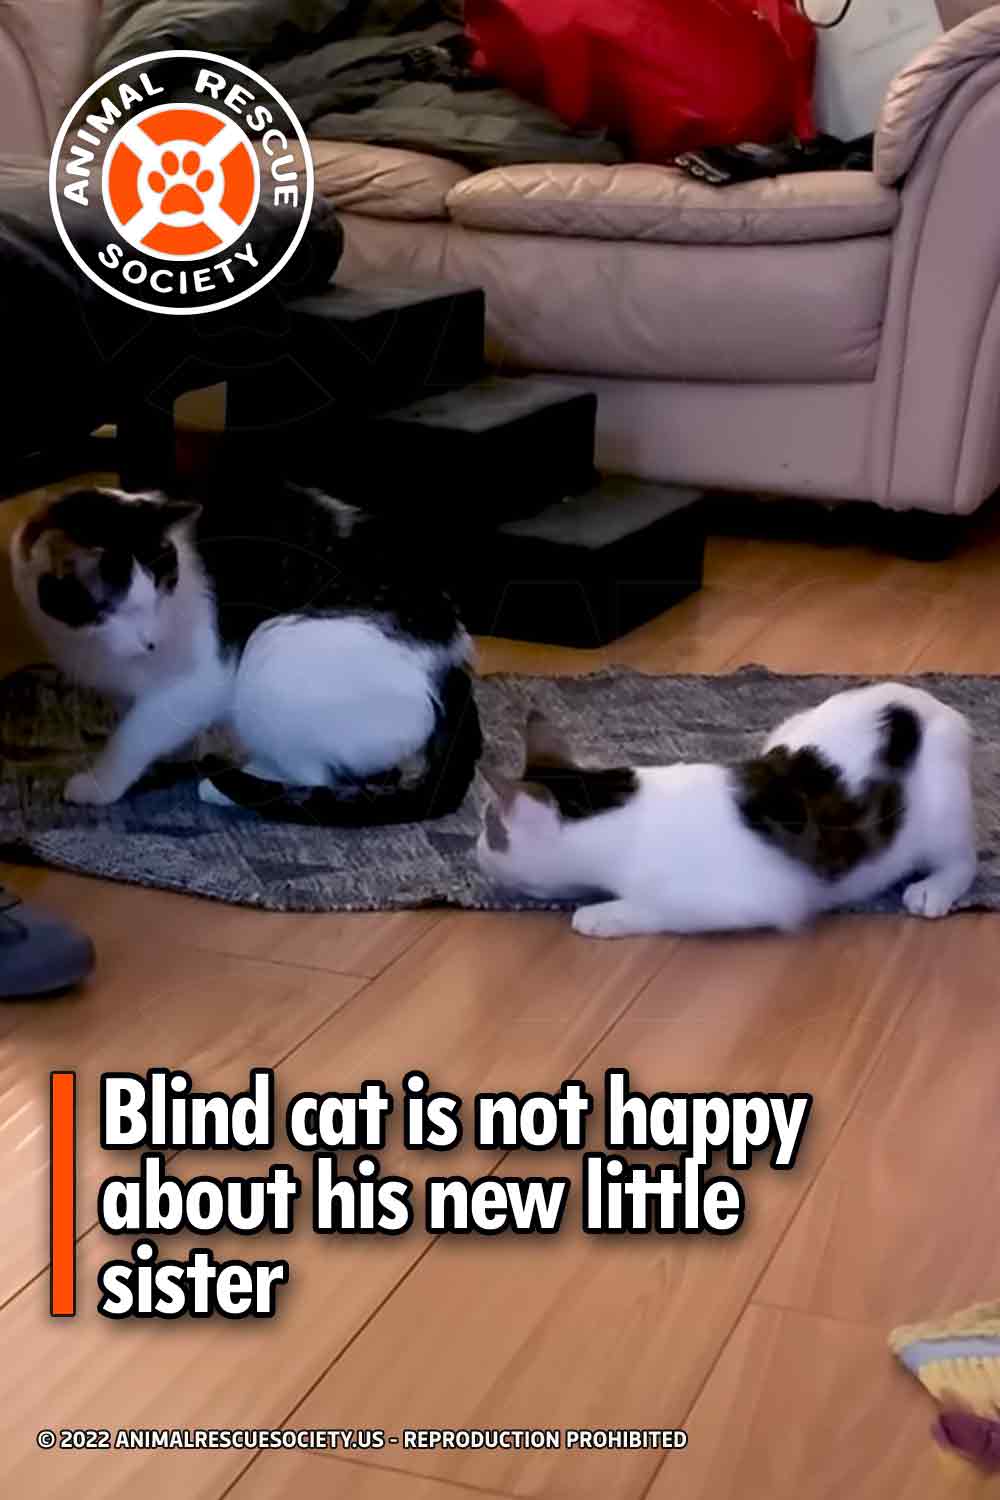 Blind cat is not happy about his new little sister